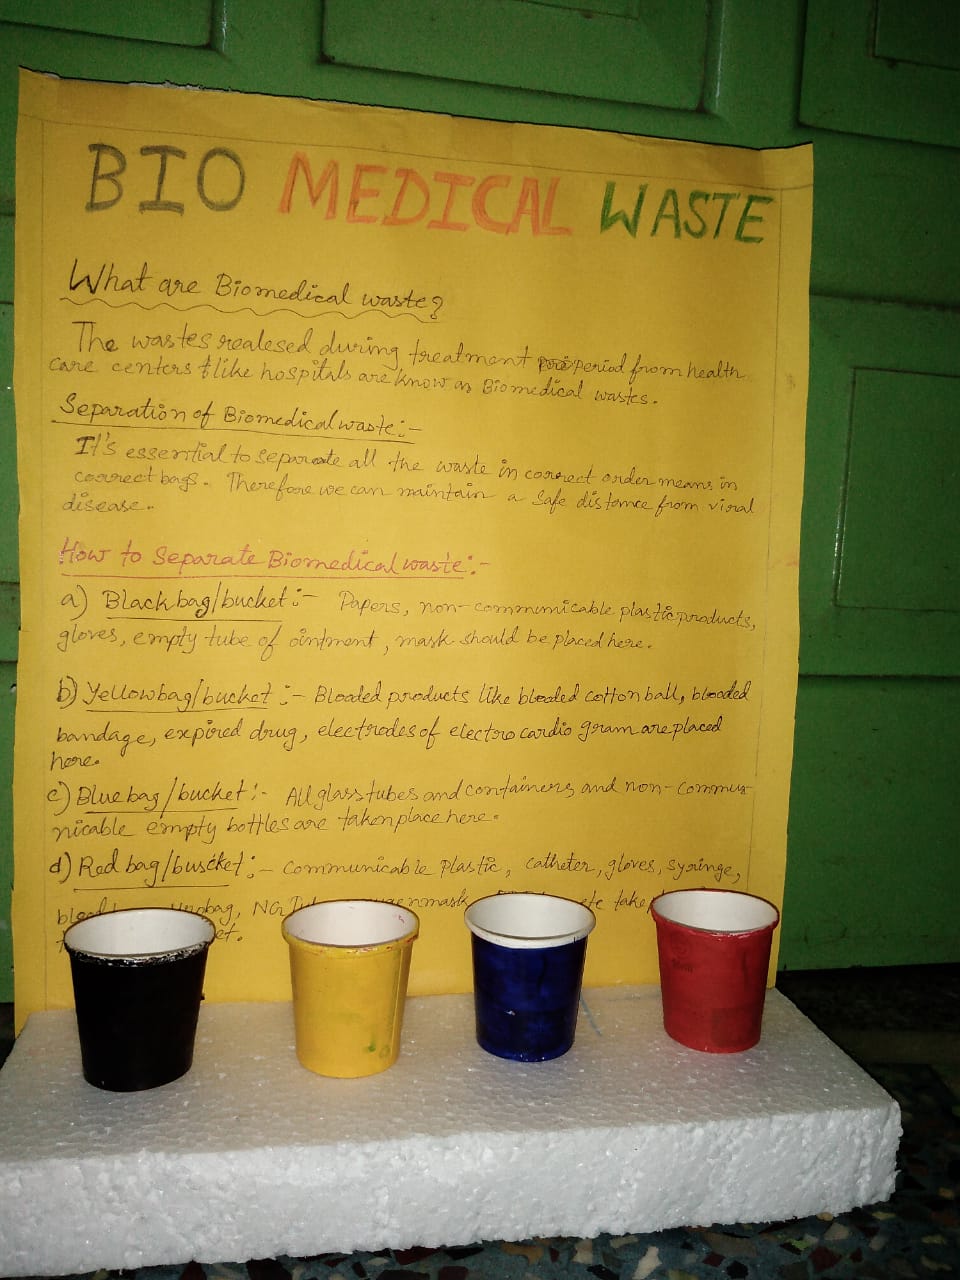 Student's of HOWRAH JOGESH CHANDRA GIRLS' SCHOOL. Model topic is  BIOMEDICAL WASTE MANAGEMENT